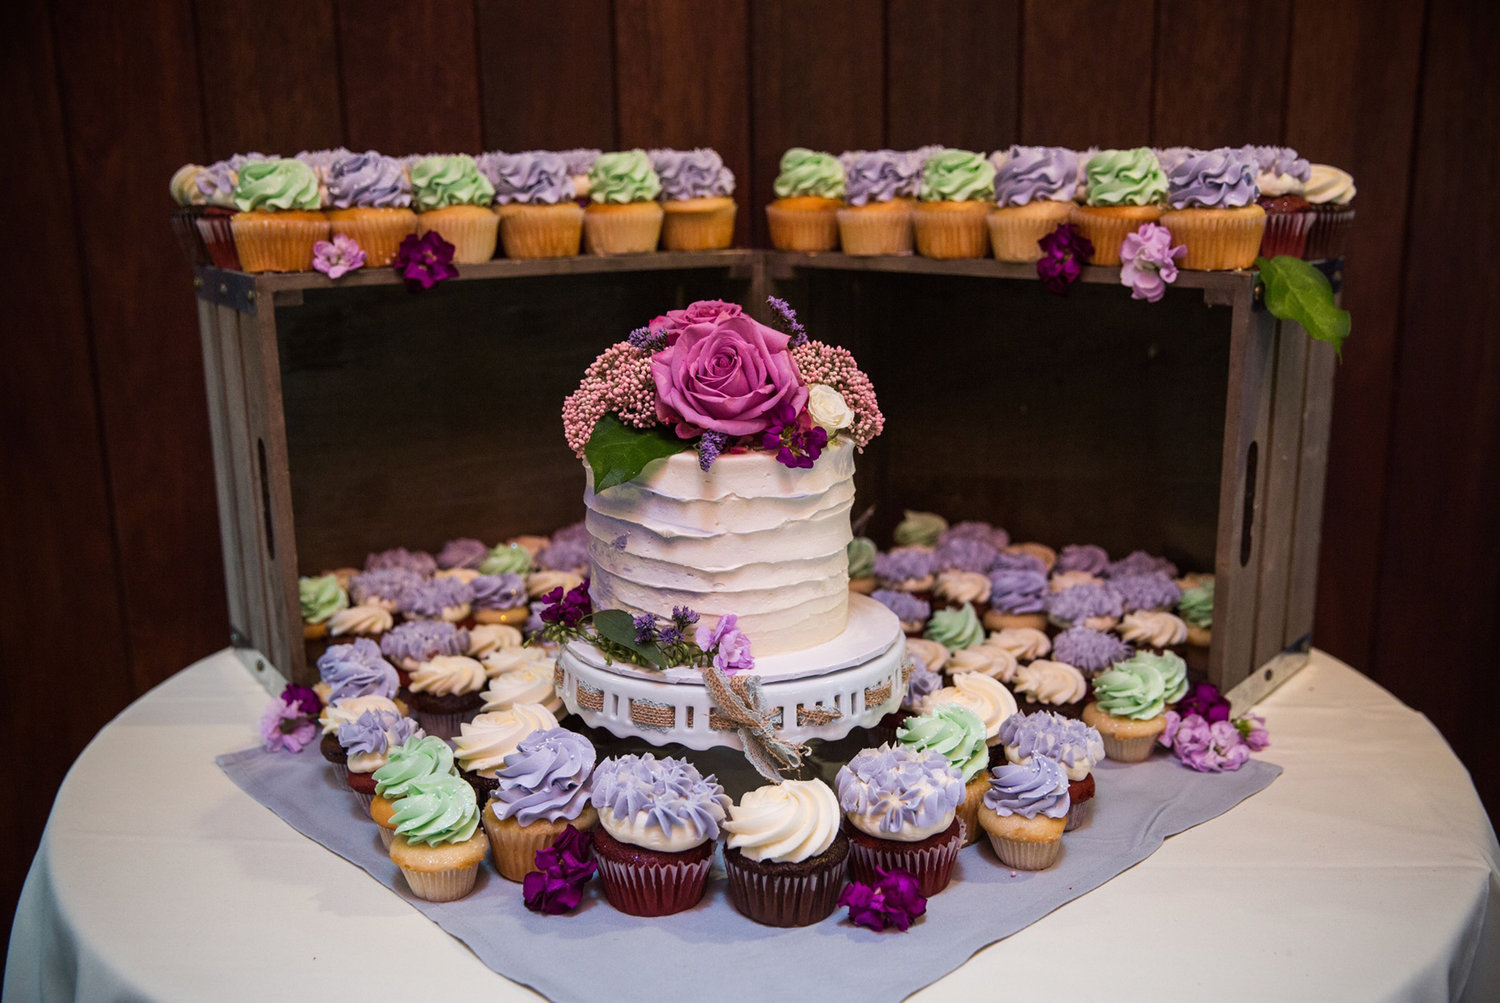 Can’t part with cake entirely? A small one surrounded by festive cupcakes from Silver Spoon Bakery is a must